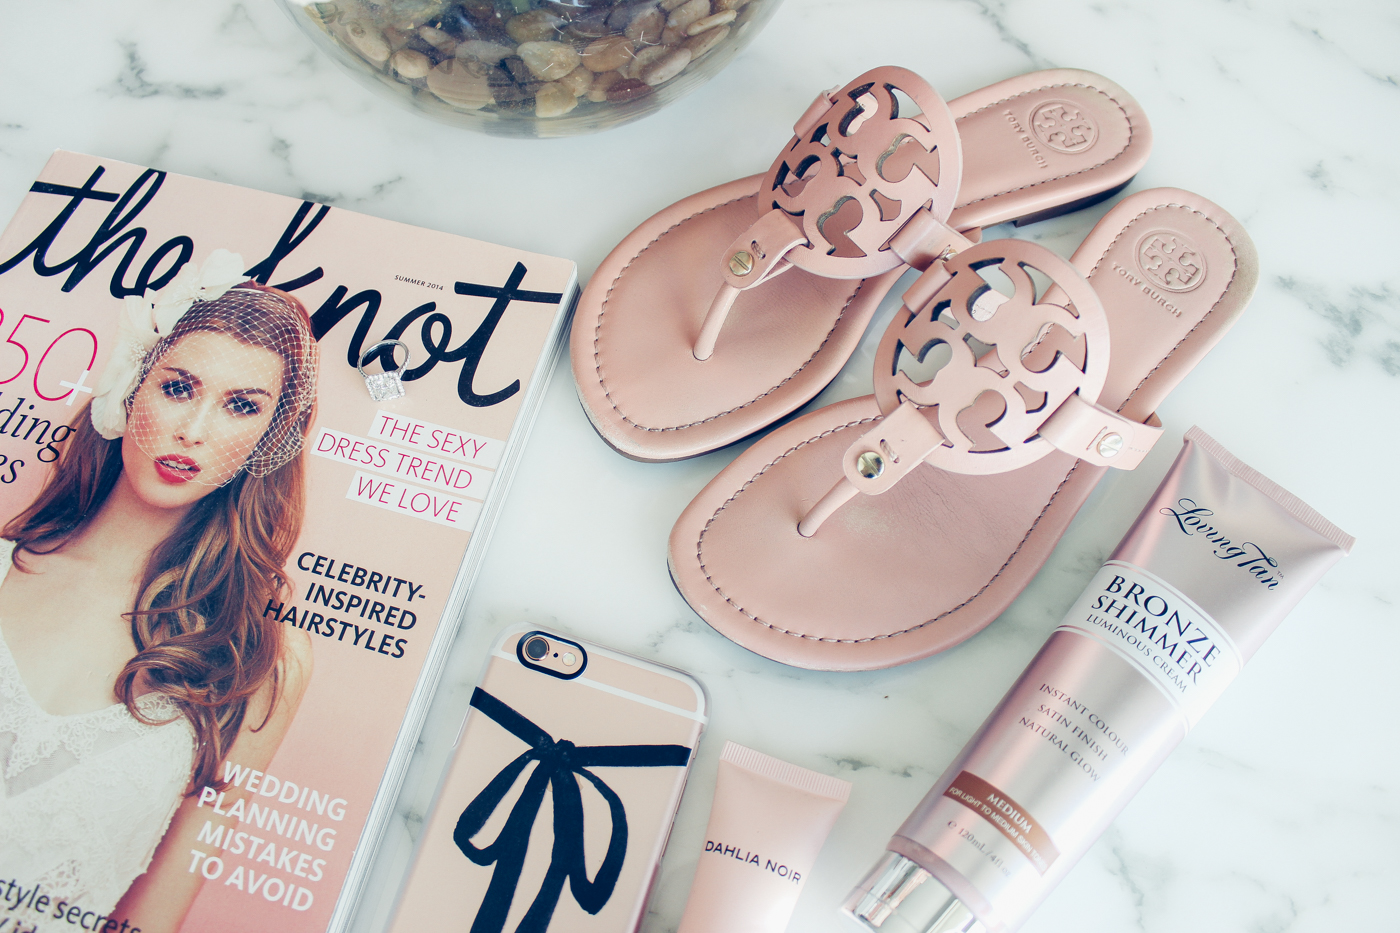 Blondie in the City |"All Things Pink" | Pink Tory Burch Sandals | The Knot Magazine @theknot | Girly Black Bow iPhone Case @casetify | Radiant Engagement Ring @happyjewelers